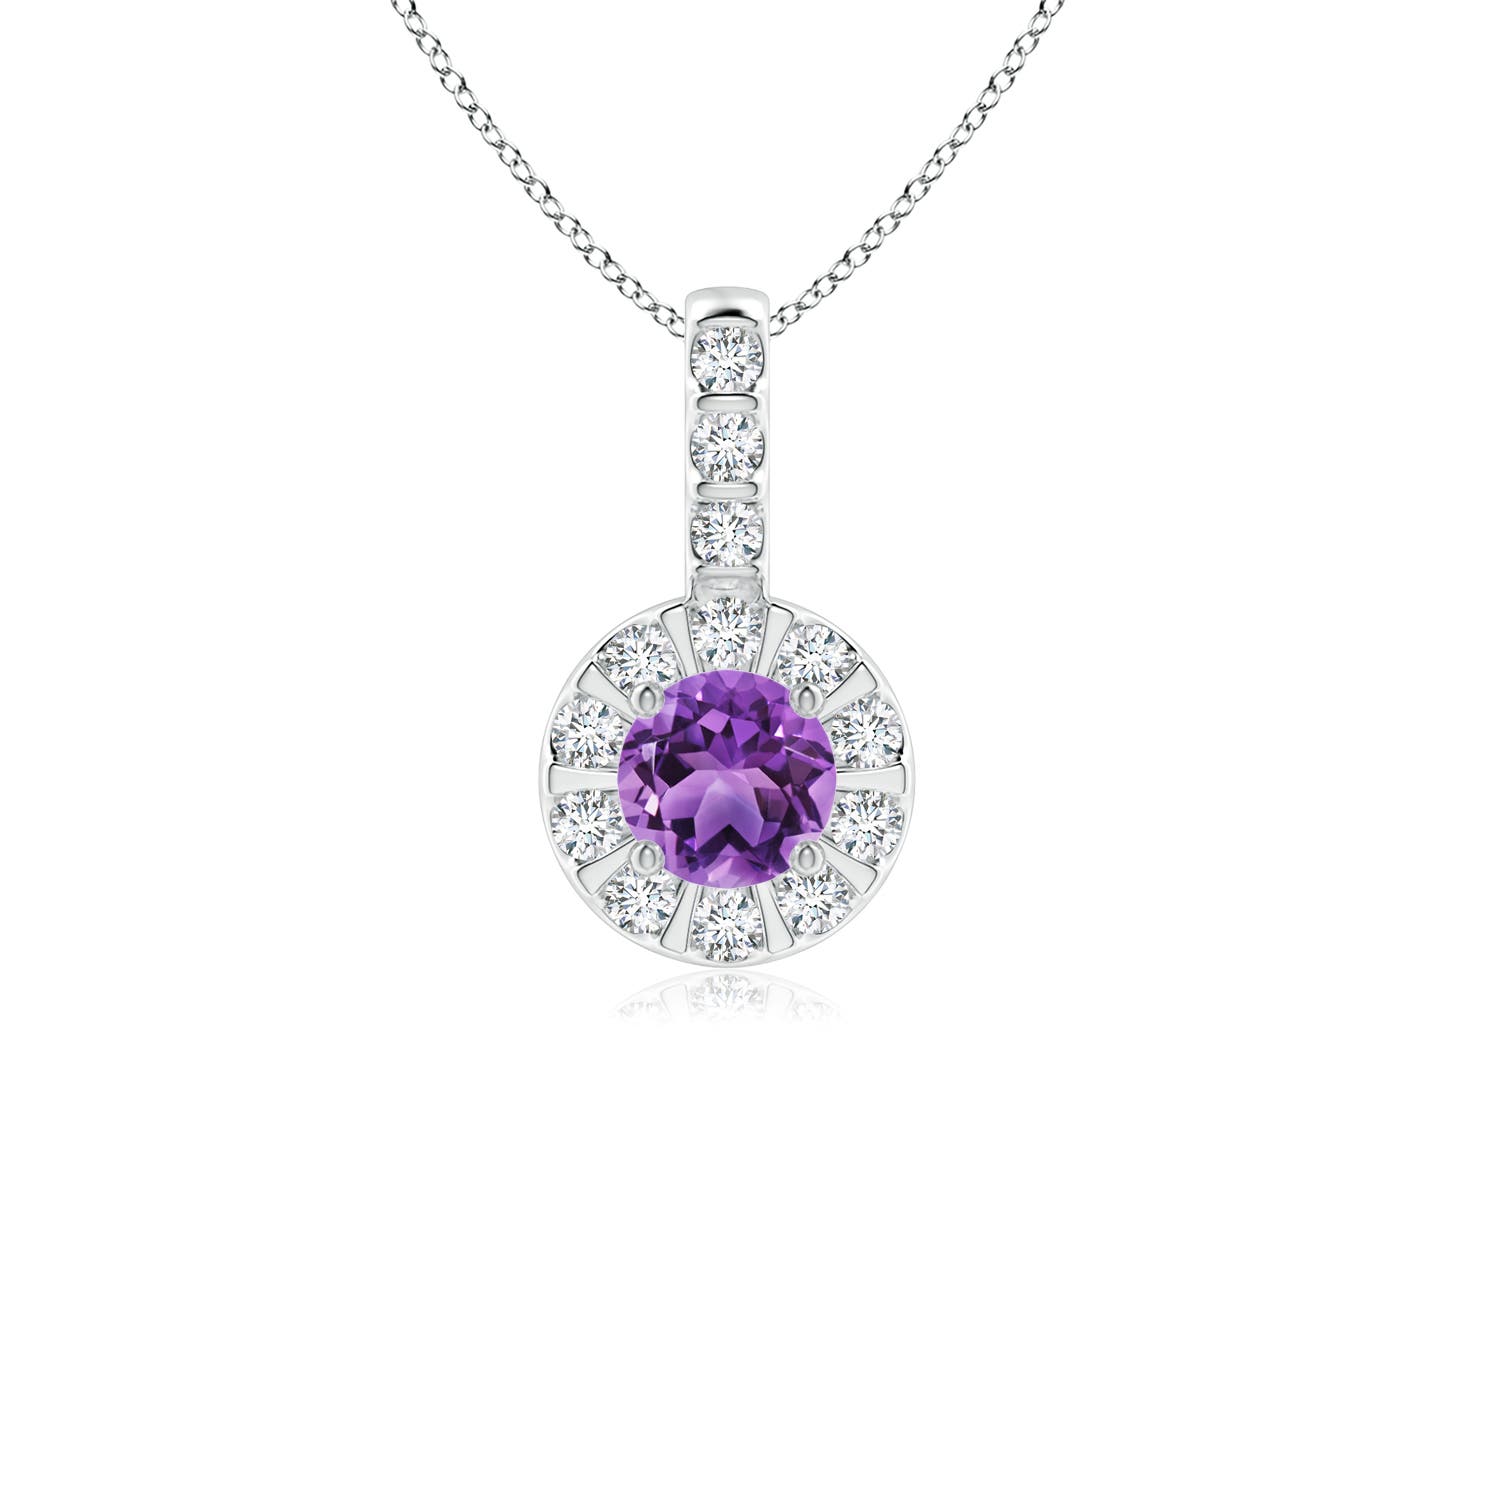 AA - Amethyst / 0.38 CT / 14 KT White Gold